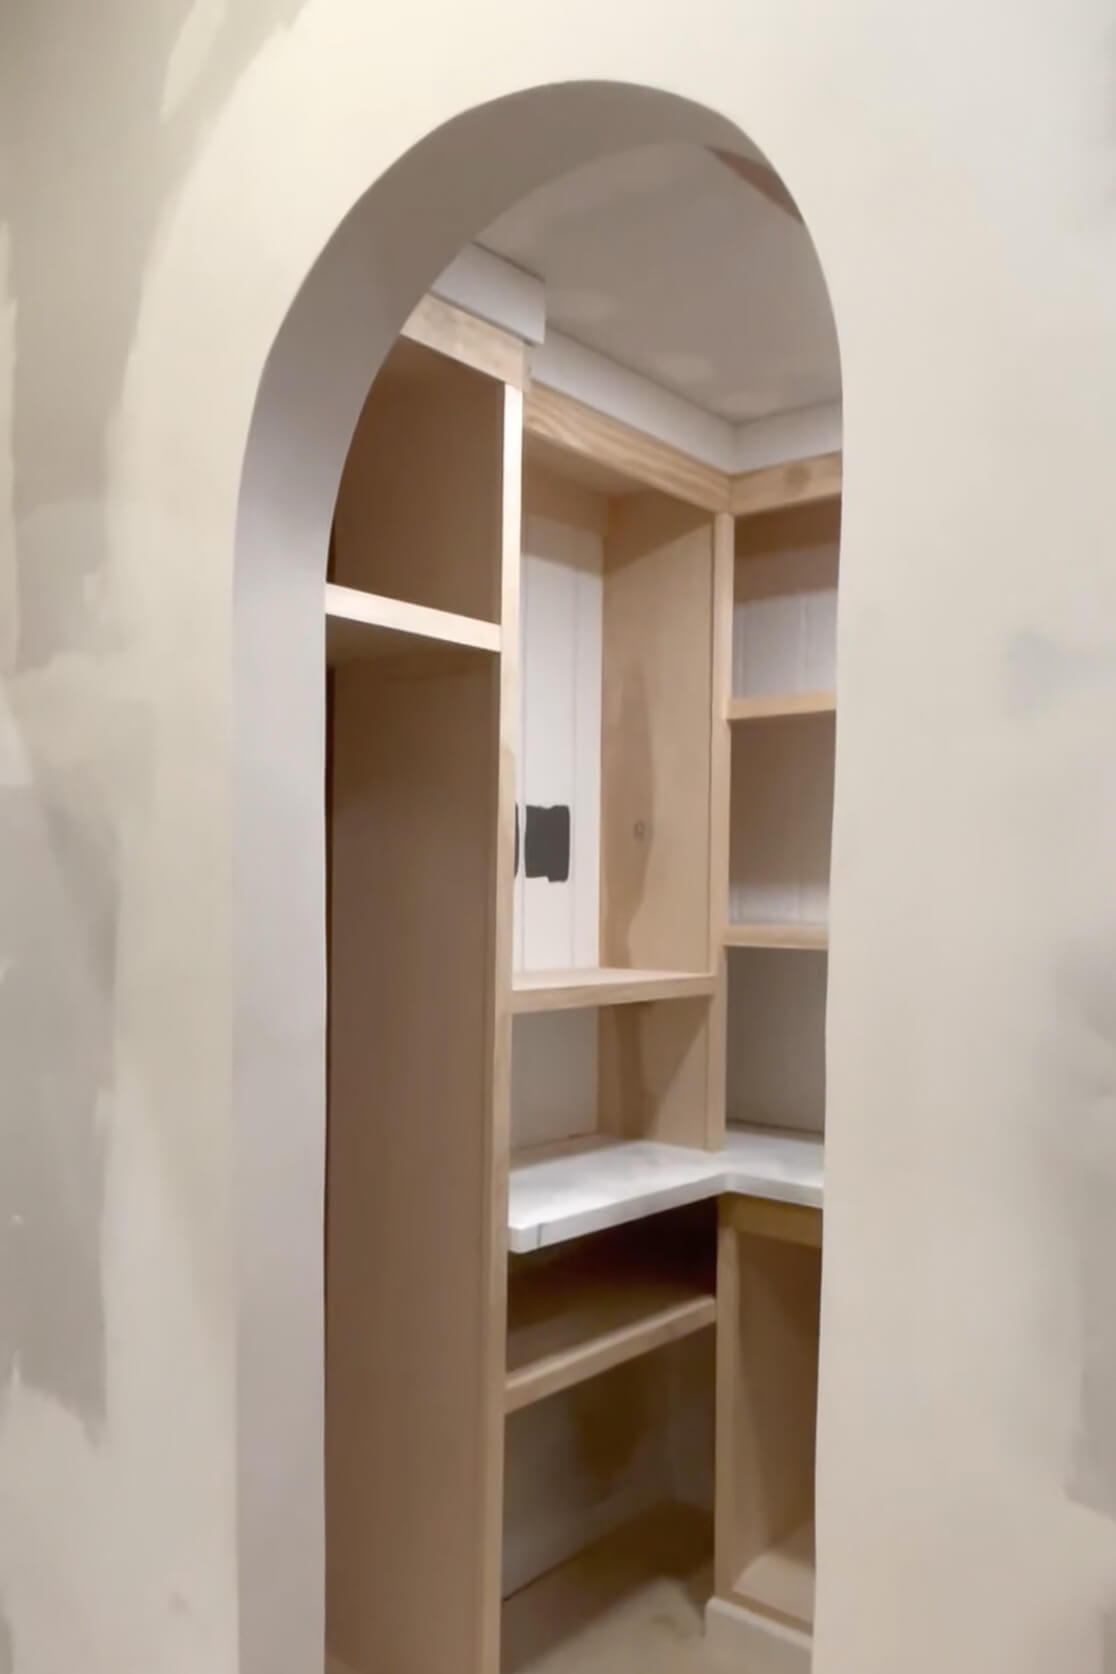 How to make an arched doorway.